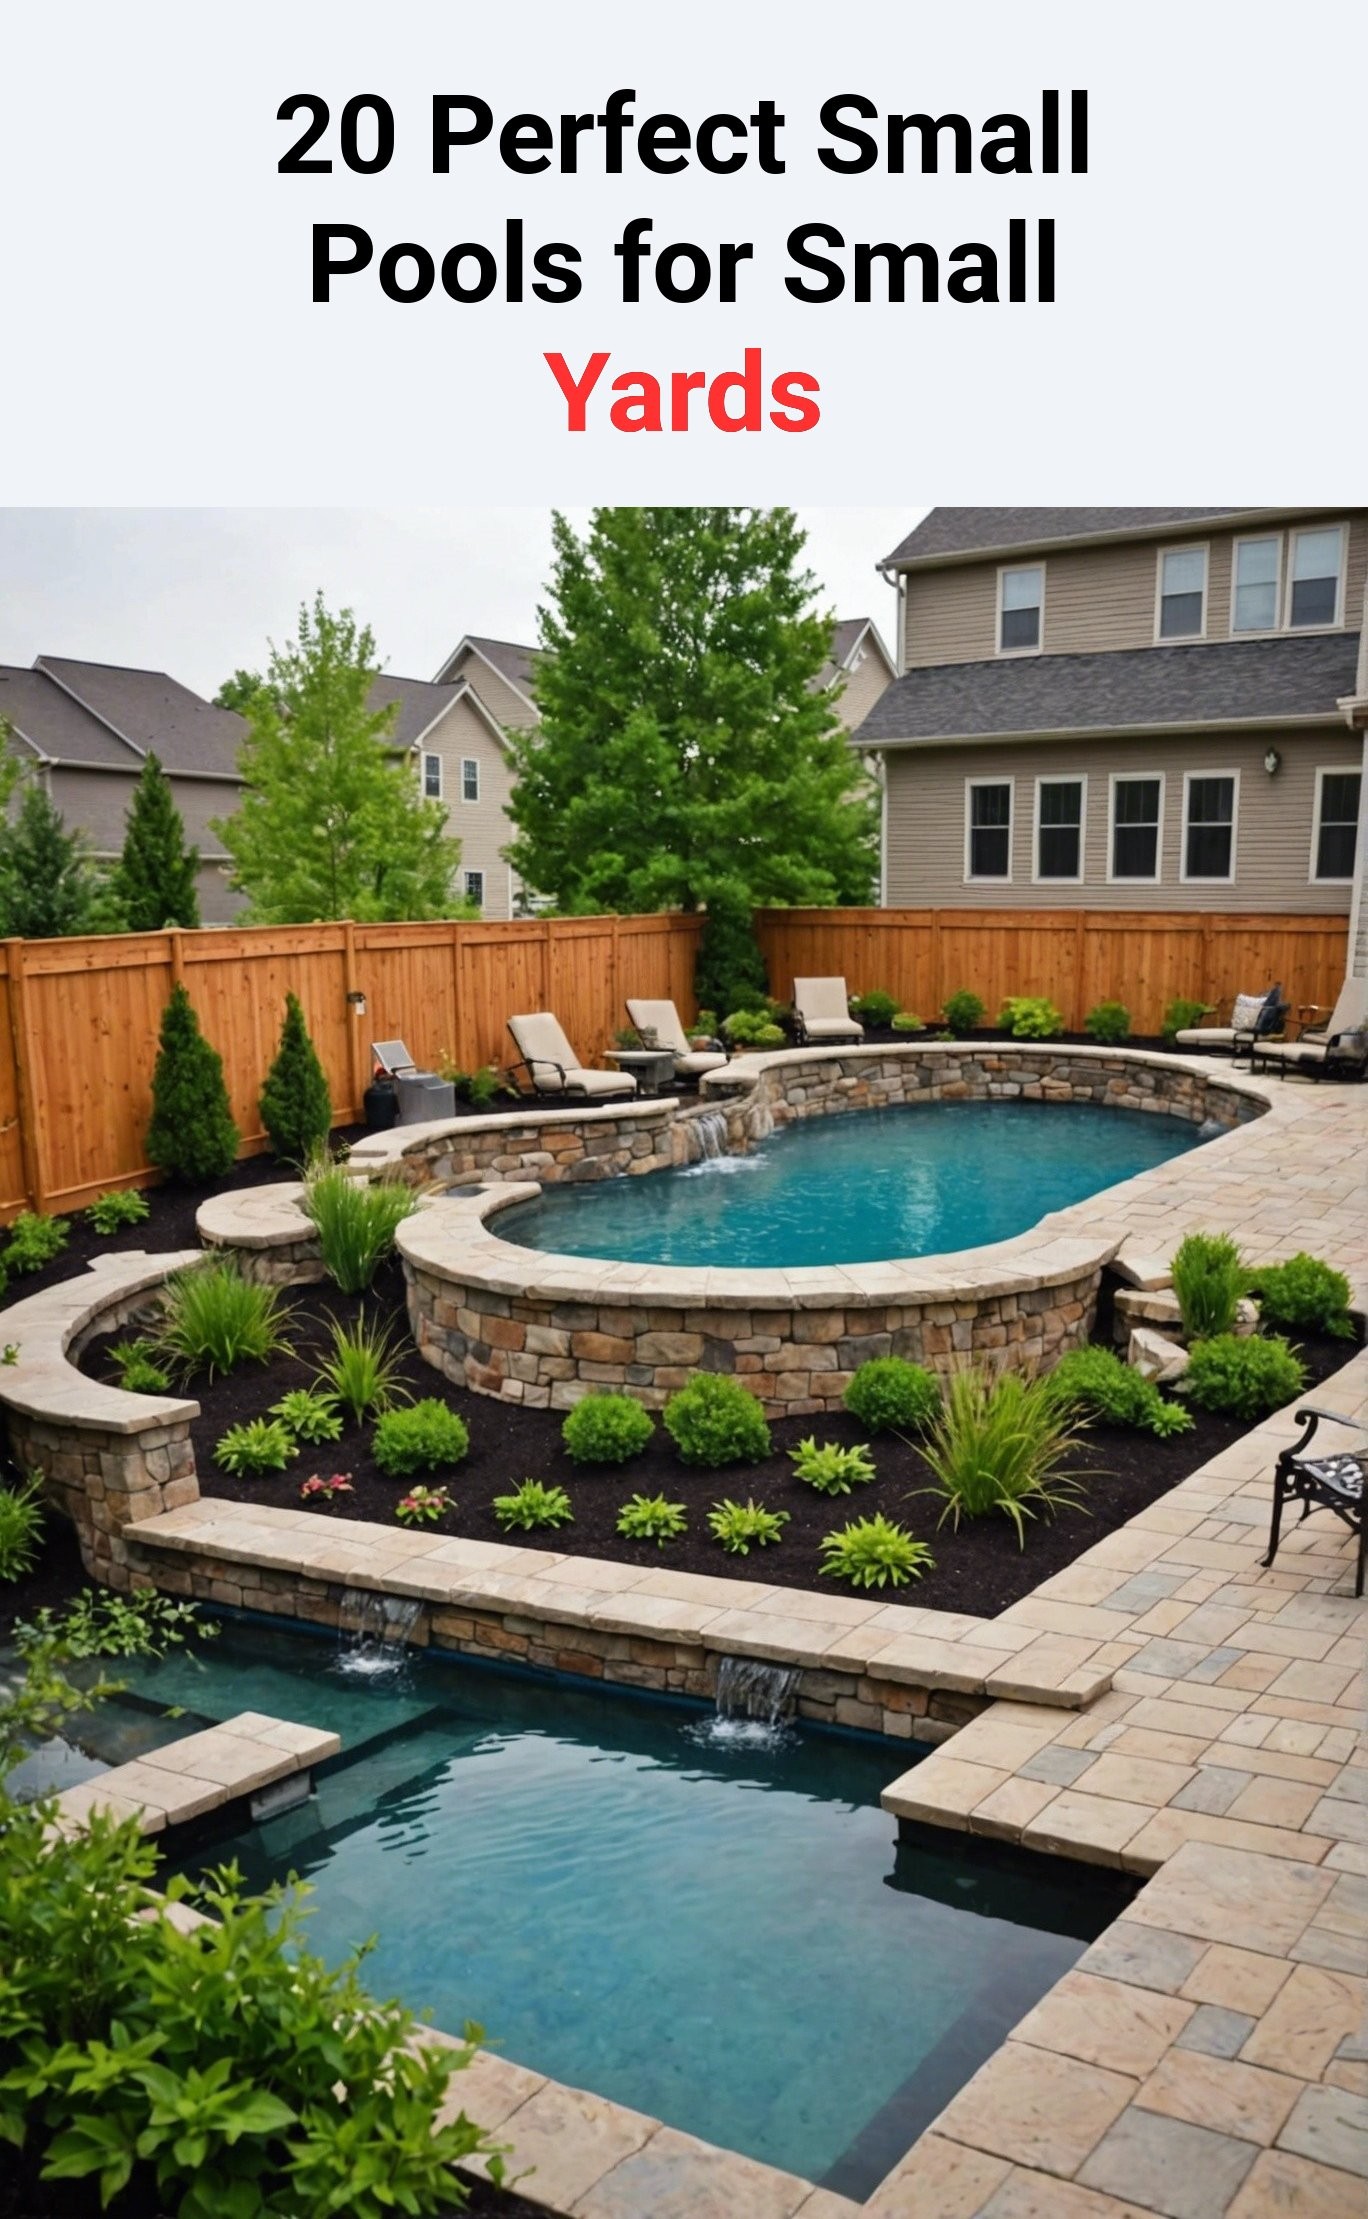 20 Perfect Small Pools for Small Yards